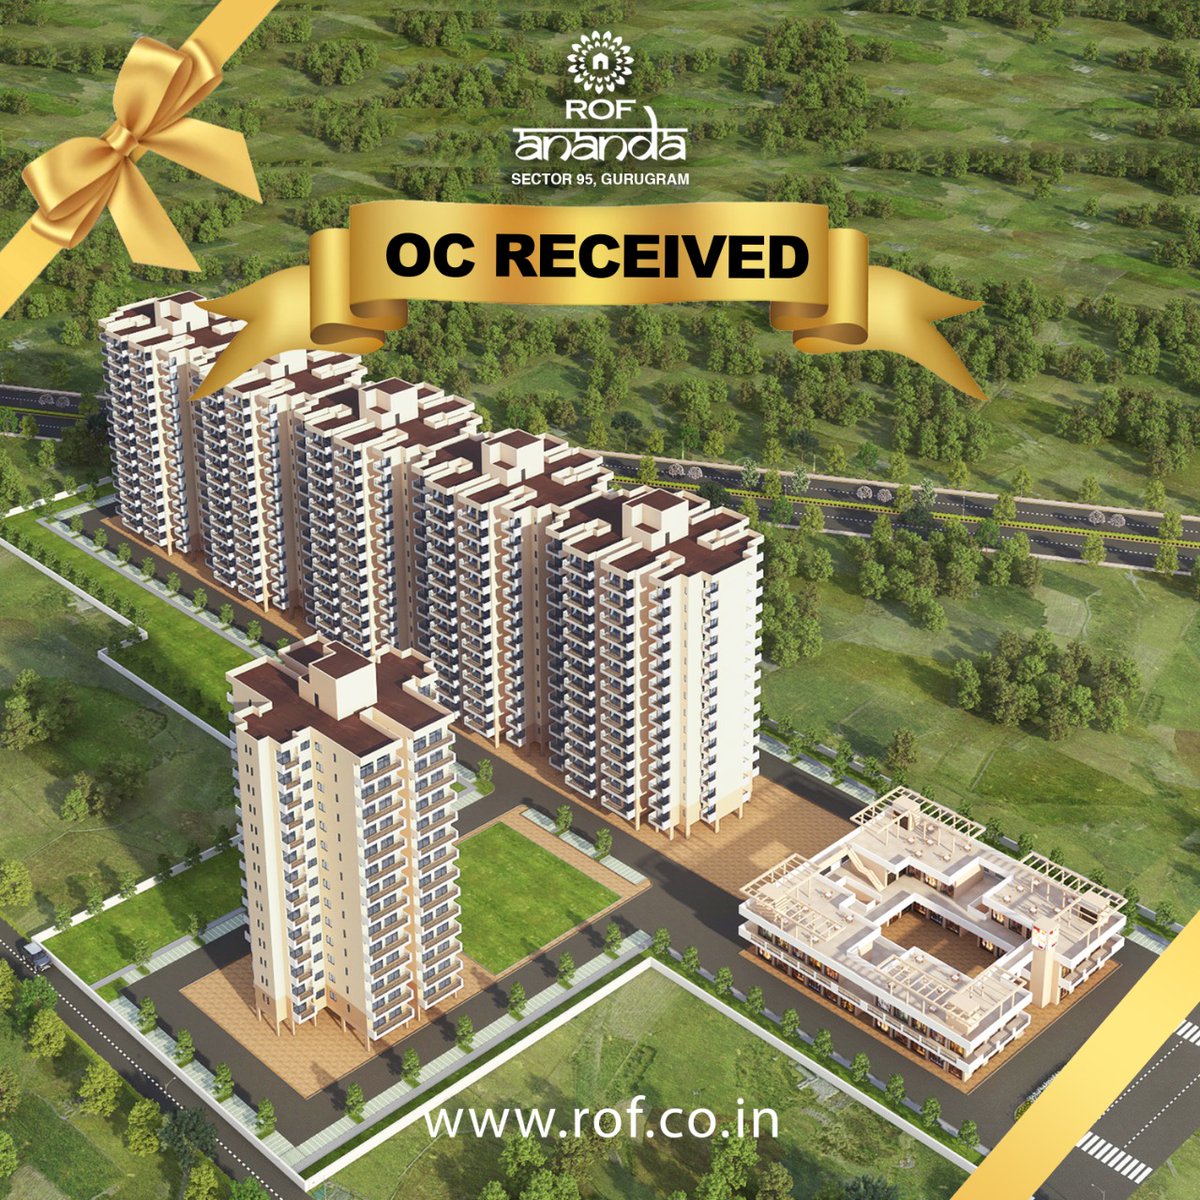 #rofananda #sector95 #occupationcertificate #oc has been #received. Now #rof #ananda is #readytomove #AffordableHousing #Residential #society in #Gurugram. #realestate  #NewsUpdates